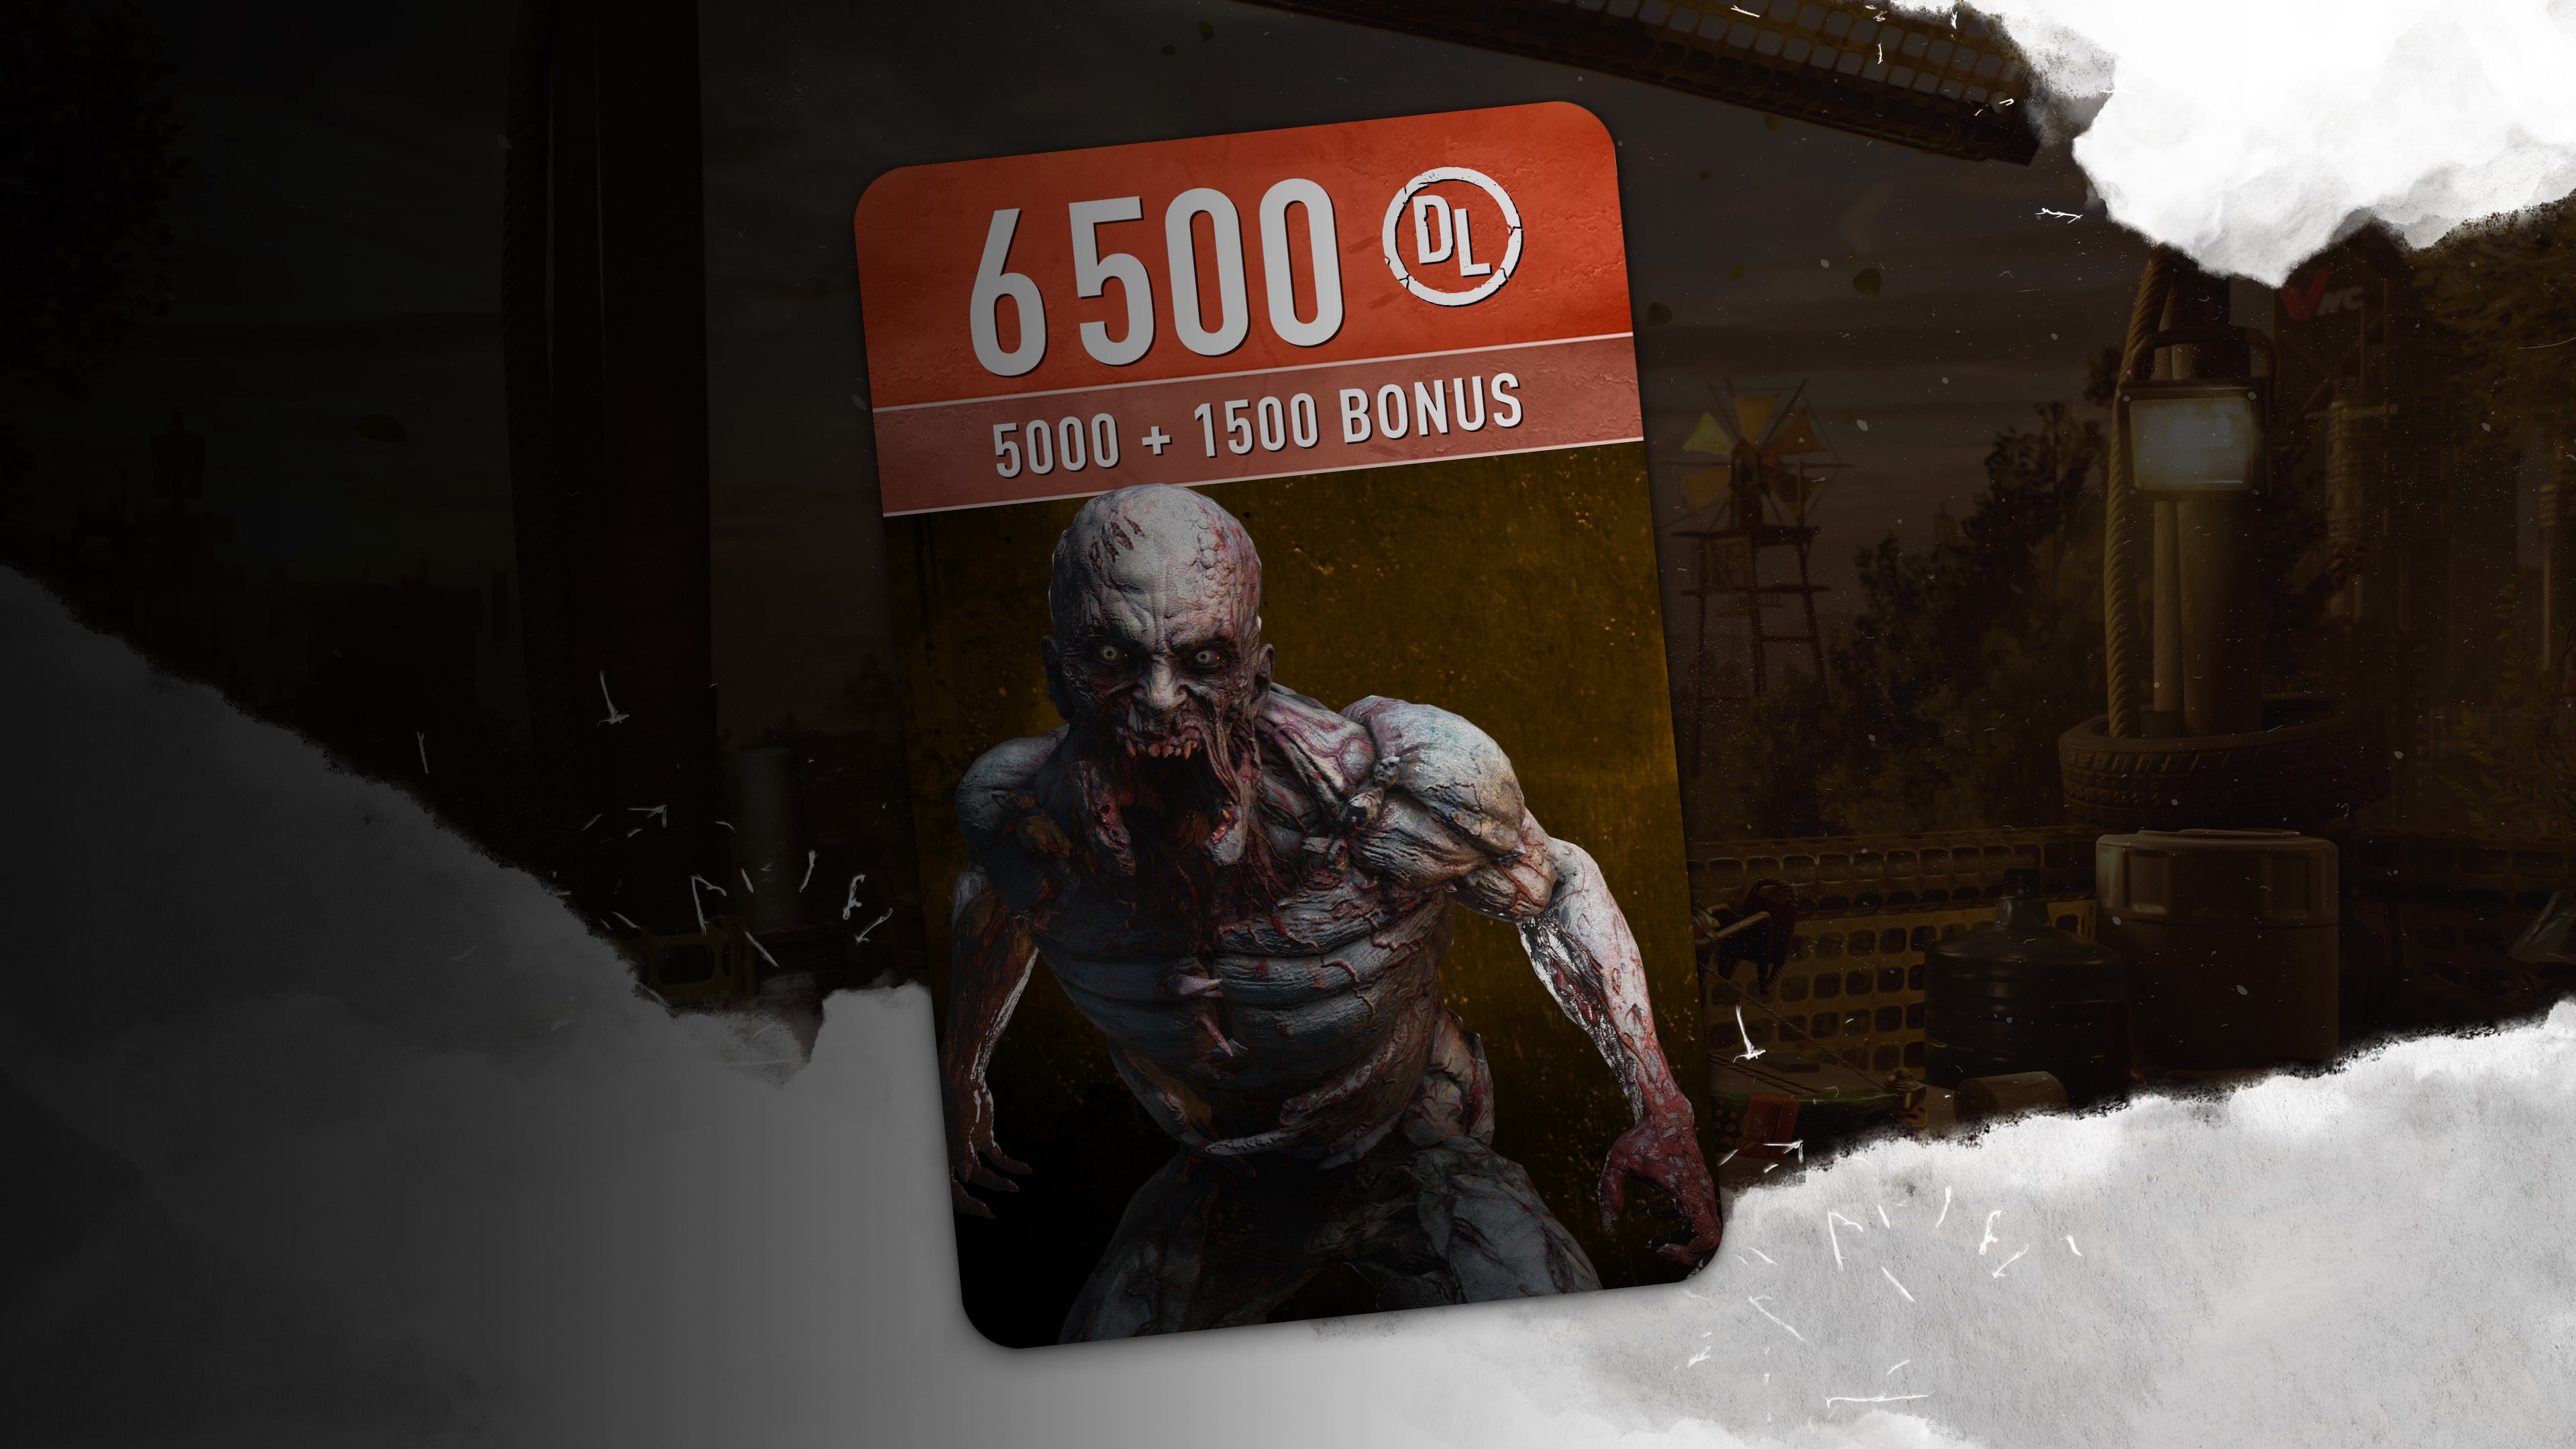 Dying Light 2 Stay Human - 6500 DL Points